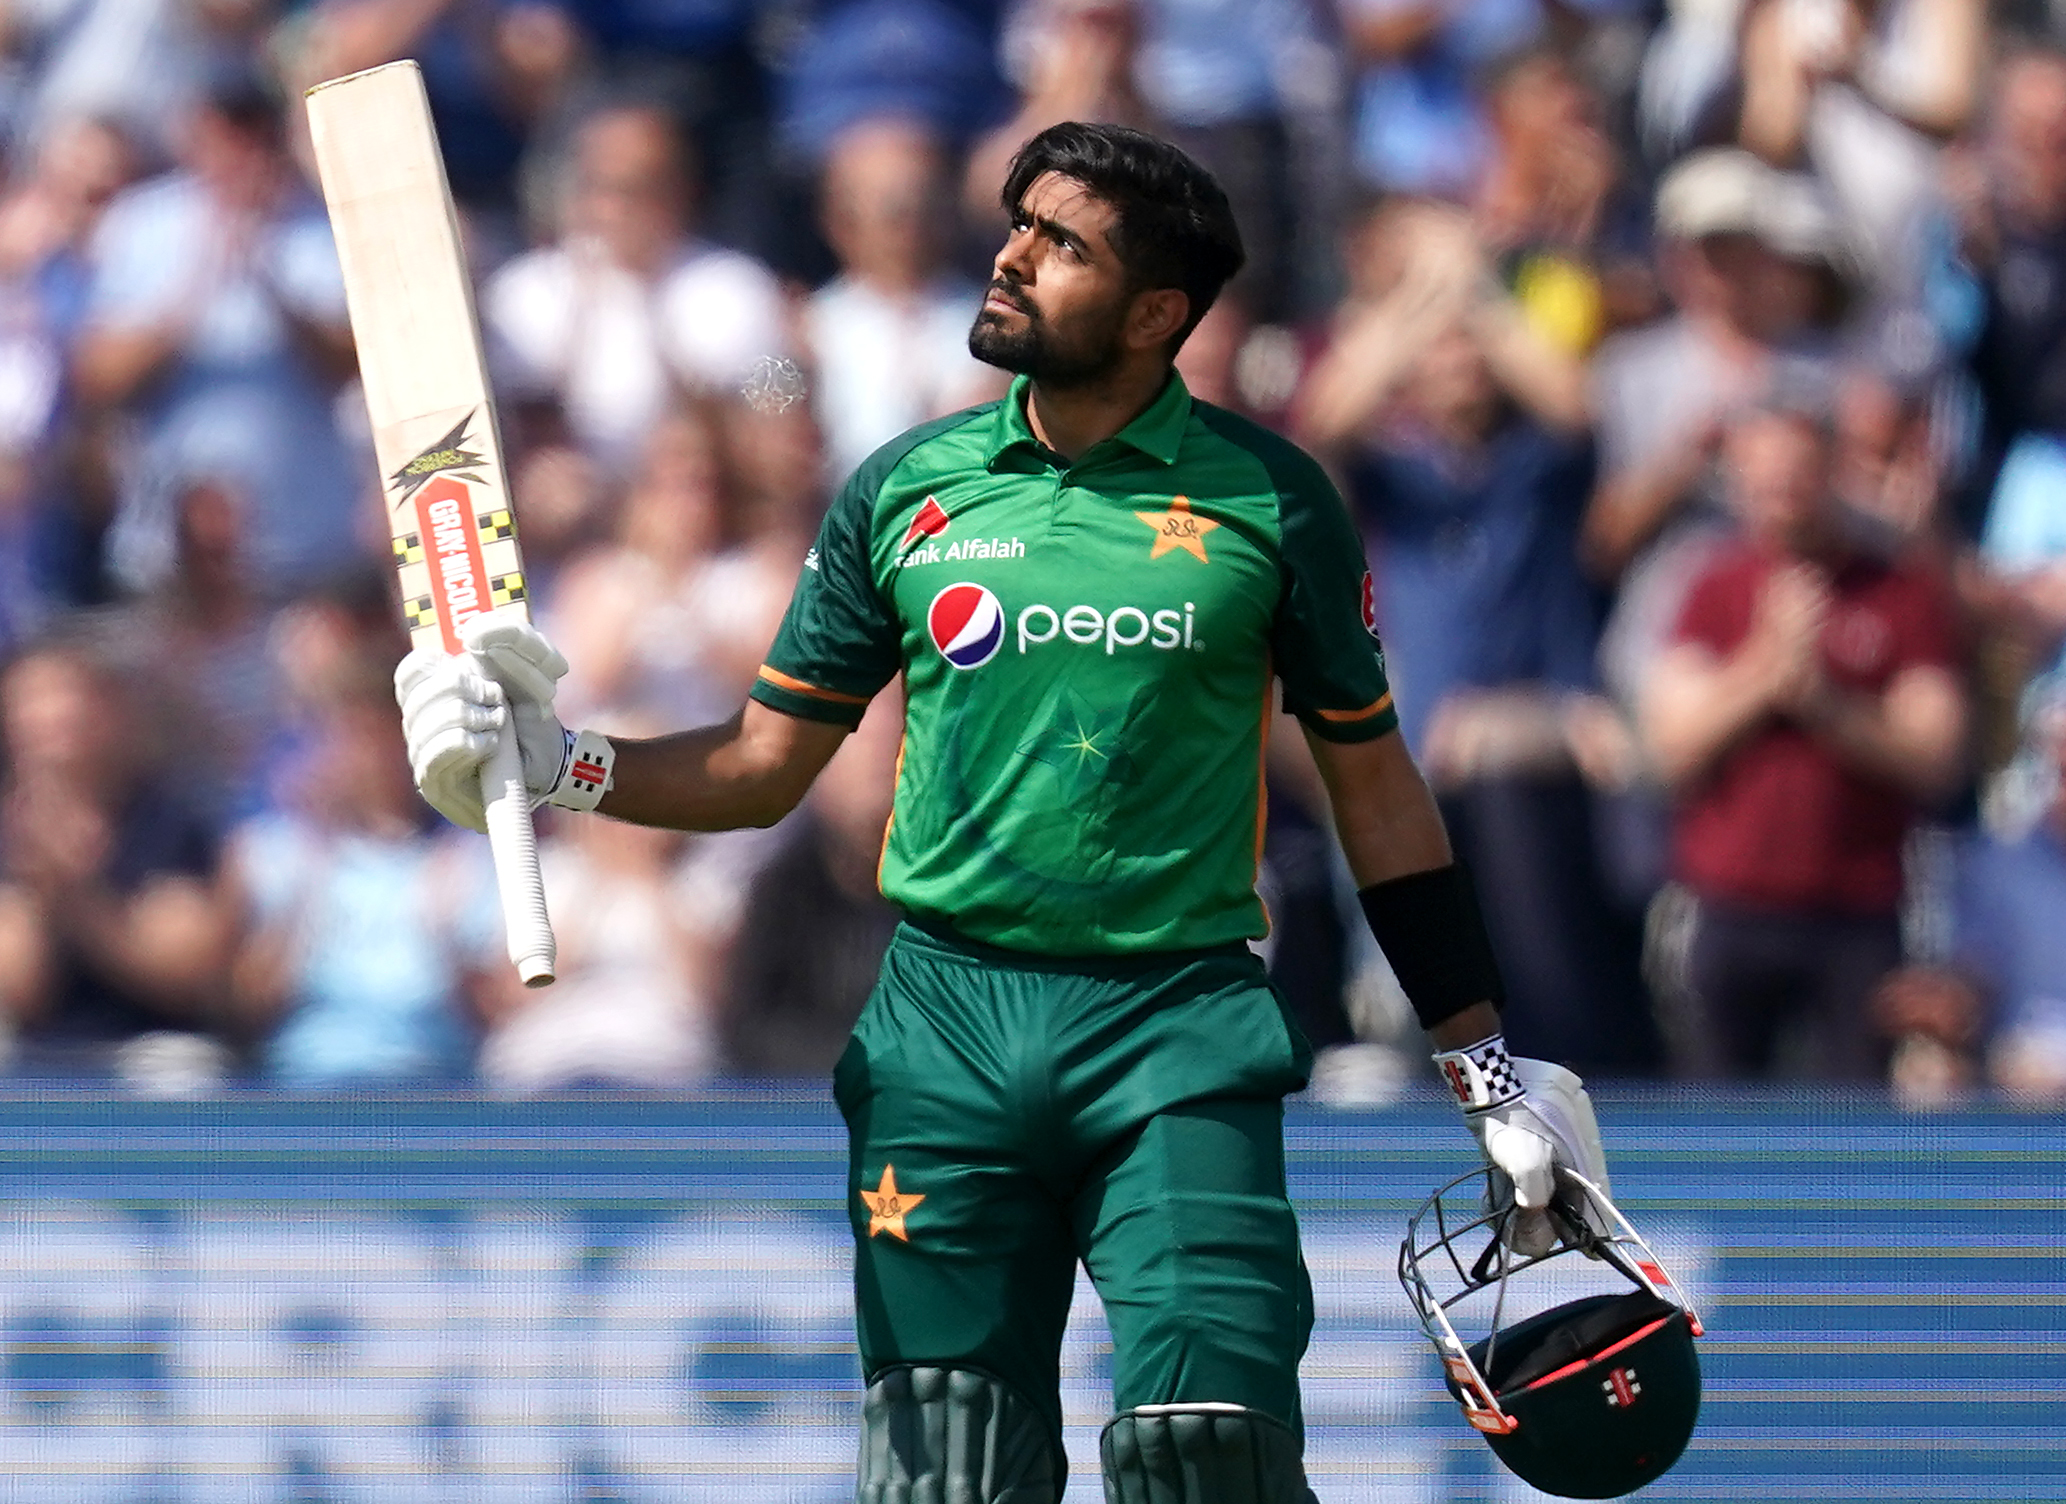 India vs Pakistan | Imran Khan shared his experience with us ahead of the T20 World Cup 2021, says Babar Azam 